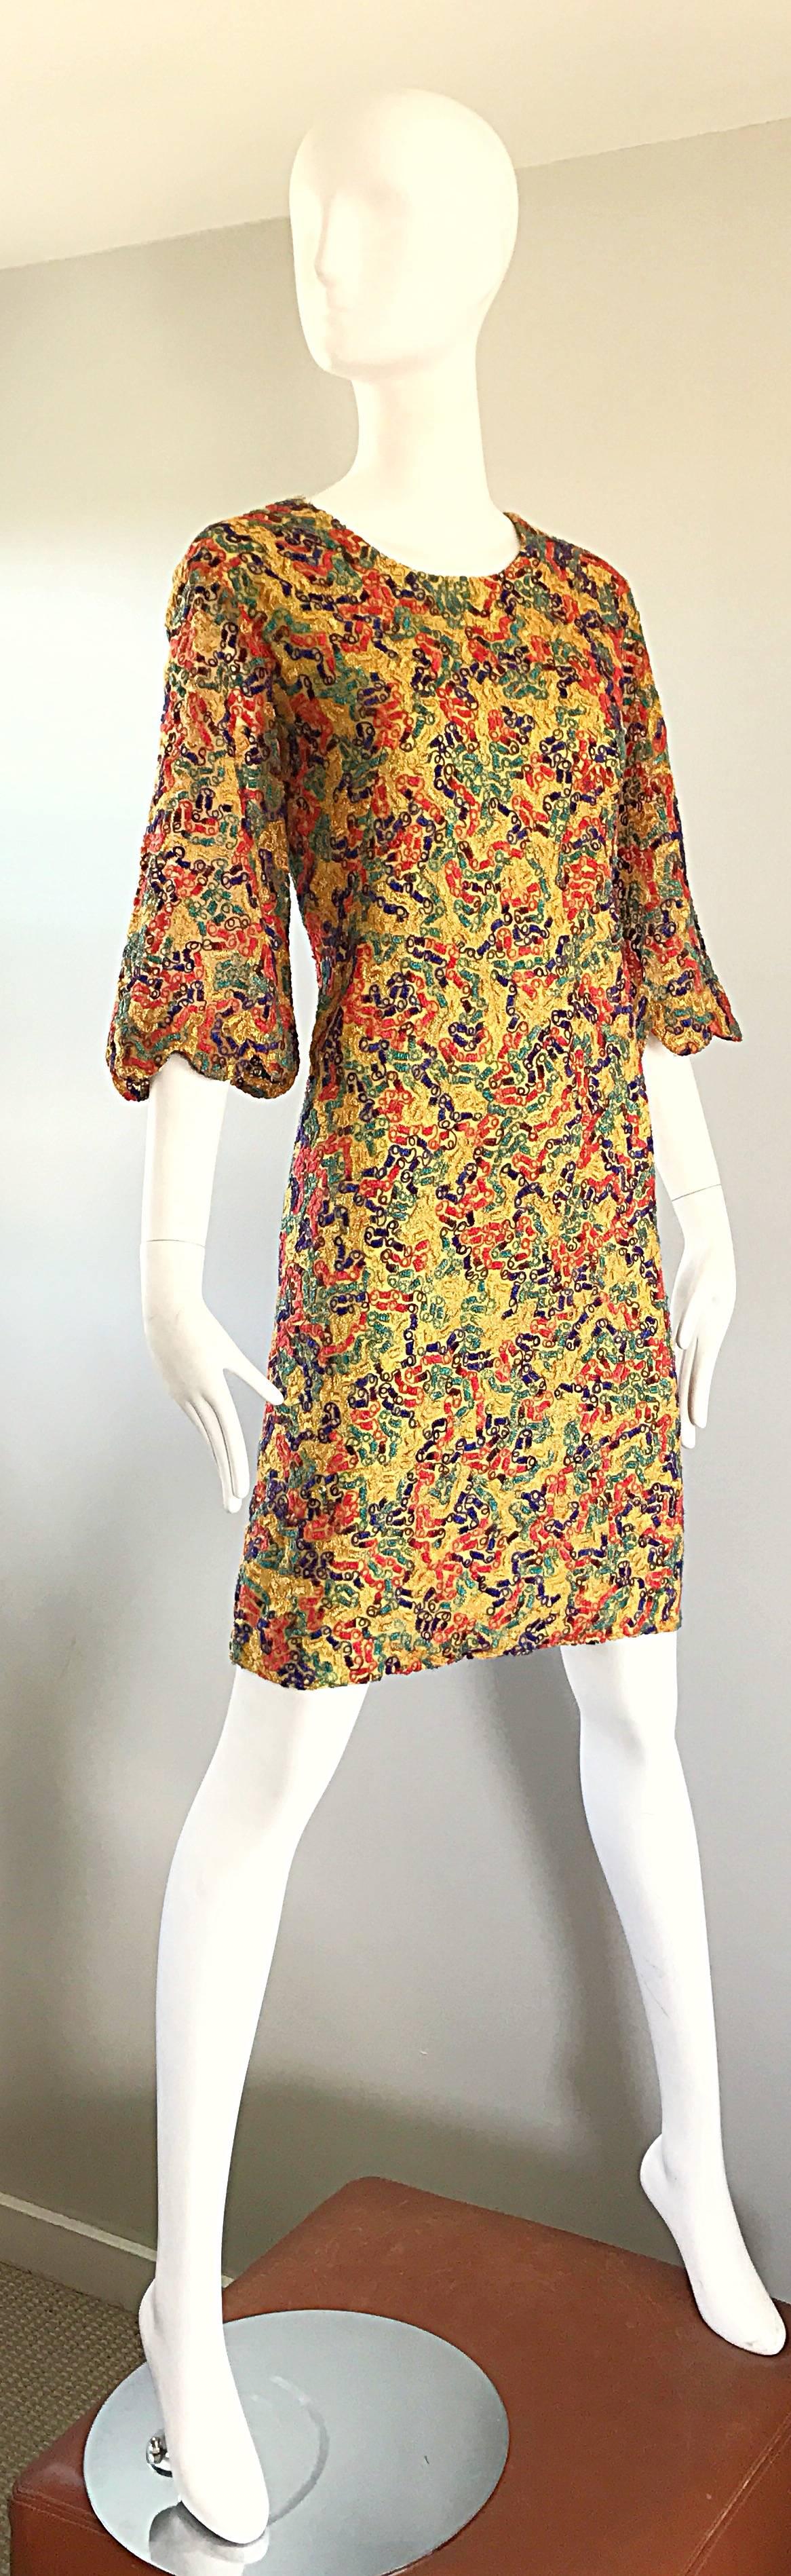 Women's Amazing 1960s Colorful 60s Vintage Mod Shift Dress w/ Scalloped Bell Sleeves For Sale